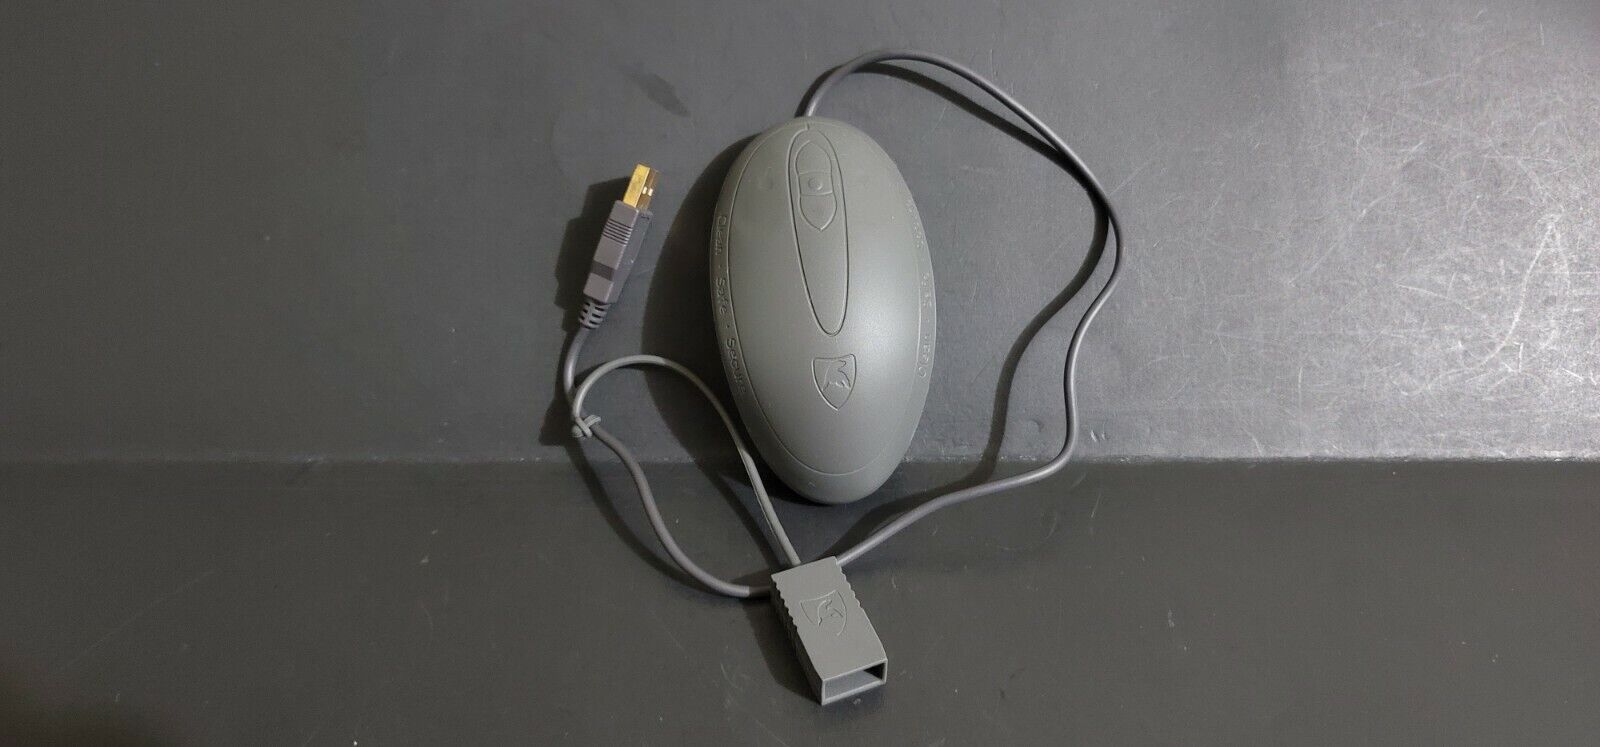 Seal Shield SSM3 USB Mouse Waterproof Medical Grade Washable Silicone Optical 